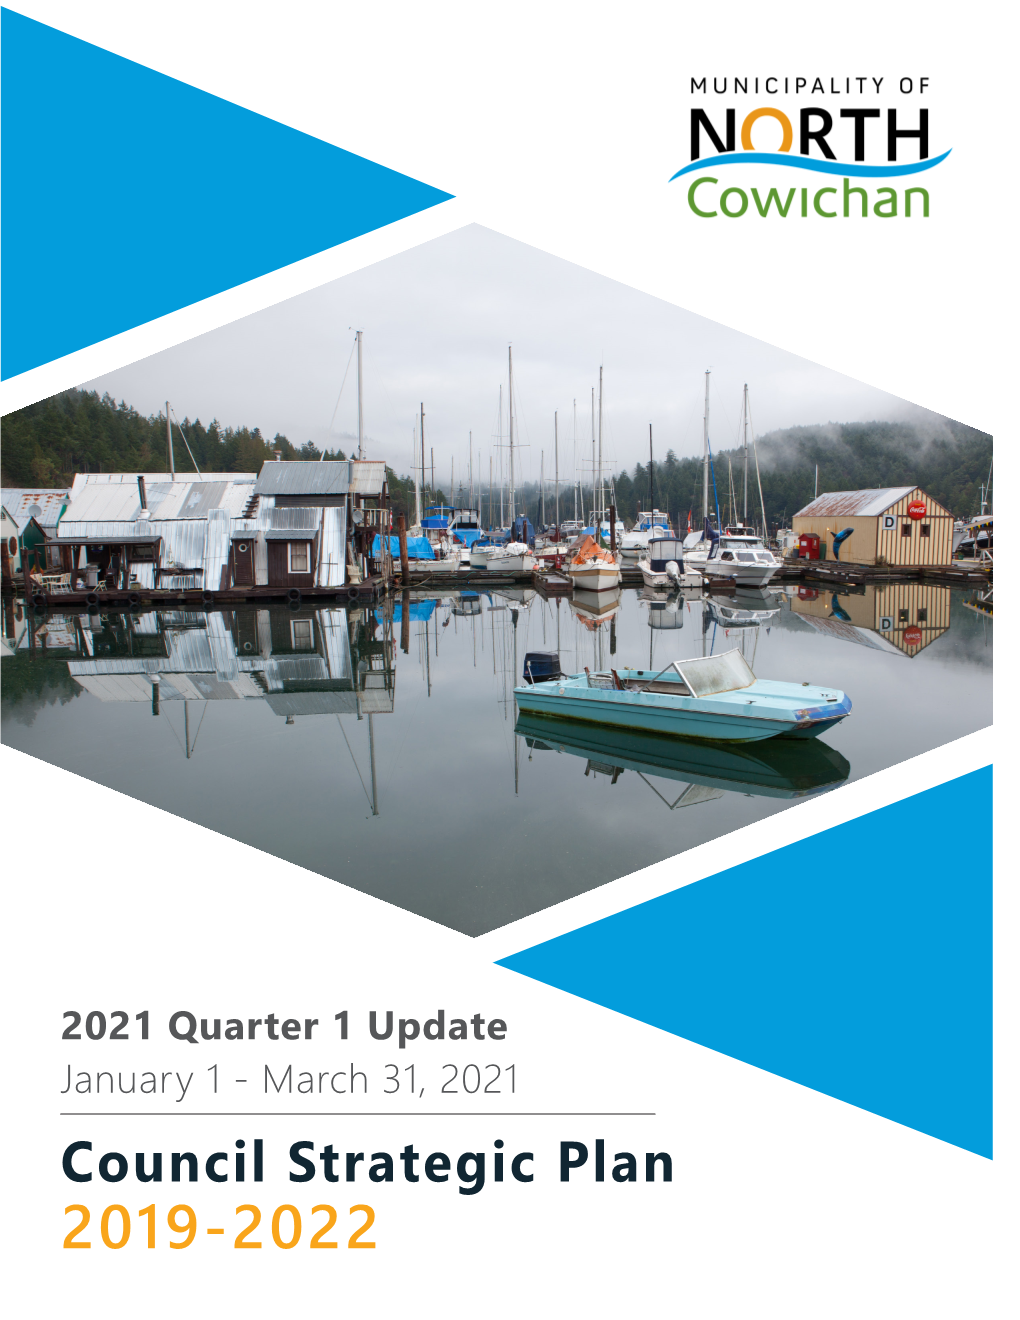 Council Strategic Plan 2019-2022 INTRODUCTION Quarter 1 Update: January 1 - March 31, 2021